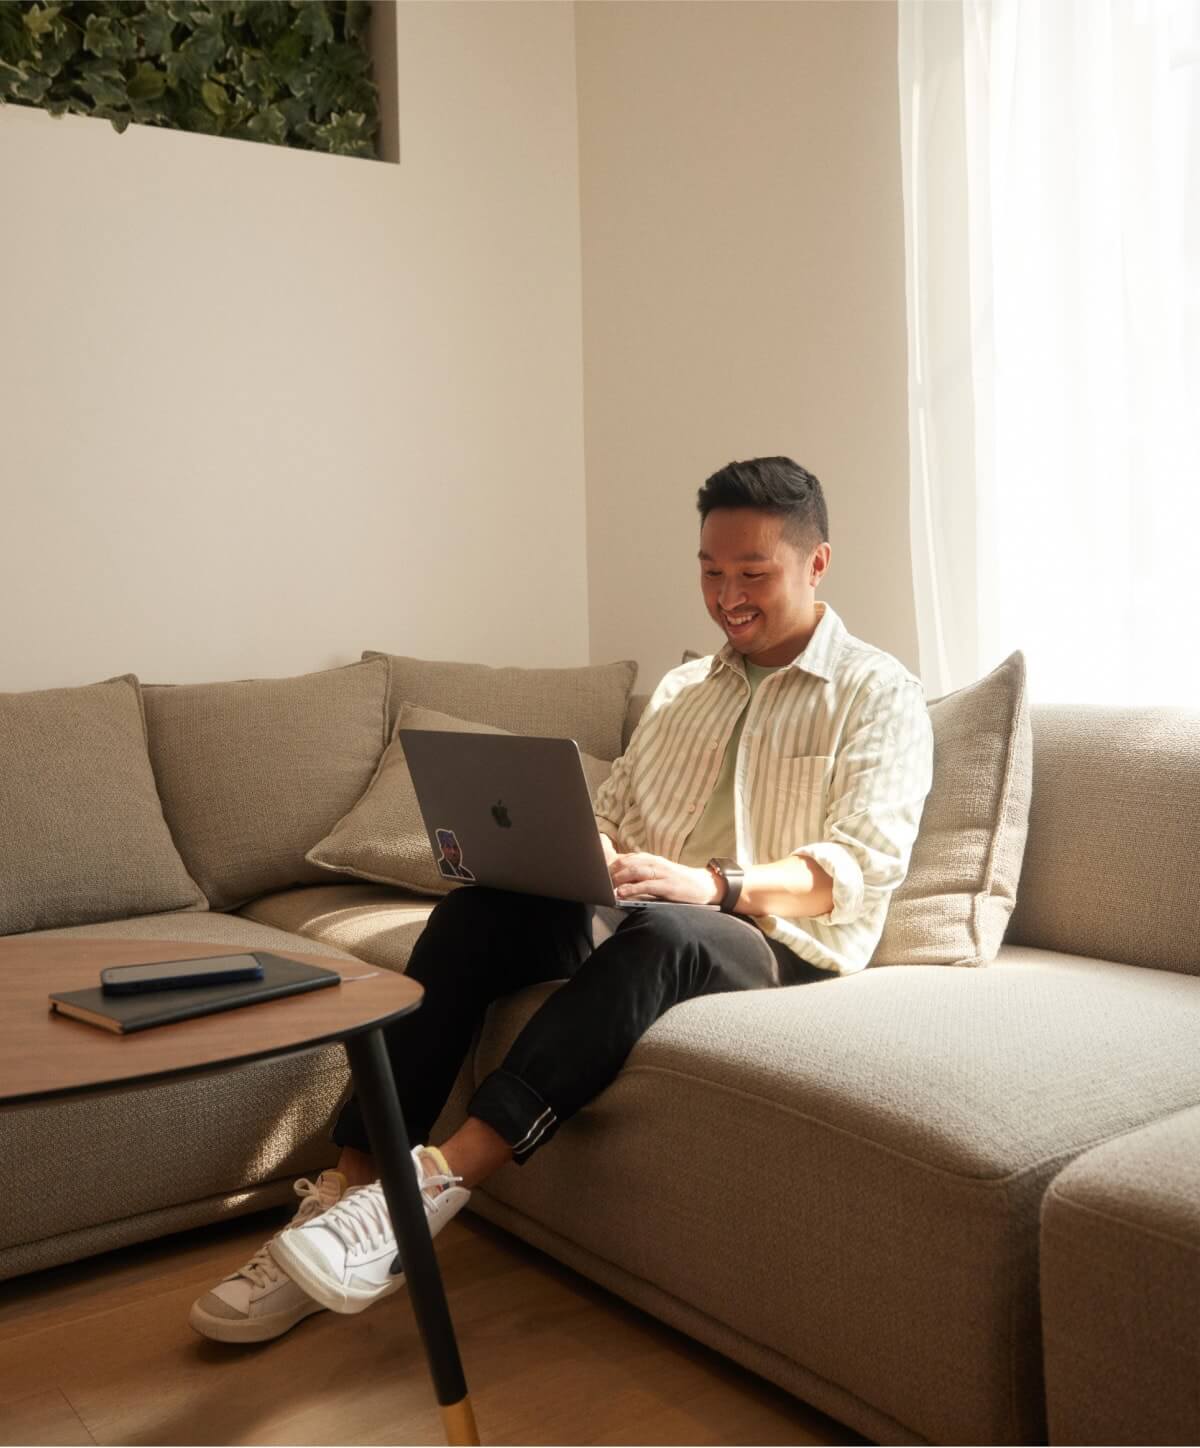 Content while working from home: A smiling individual working from their couch, showcasing productivity and comfort in a remote work environment